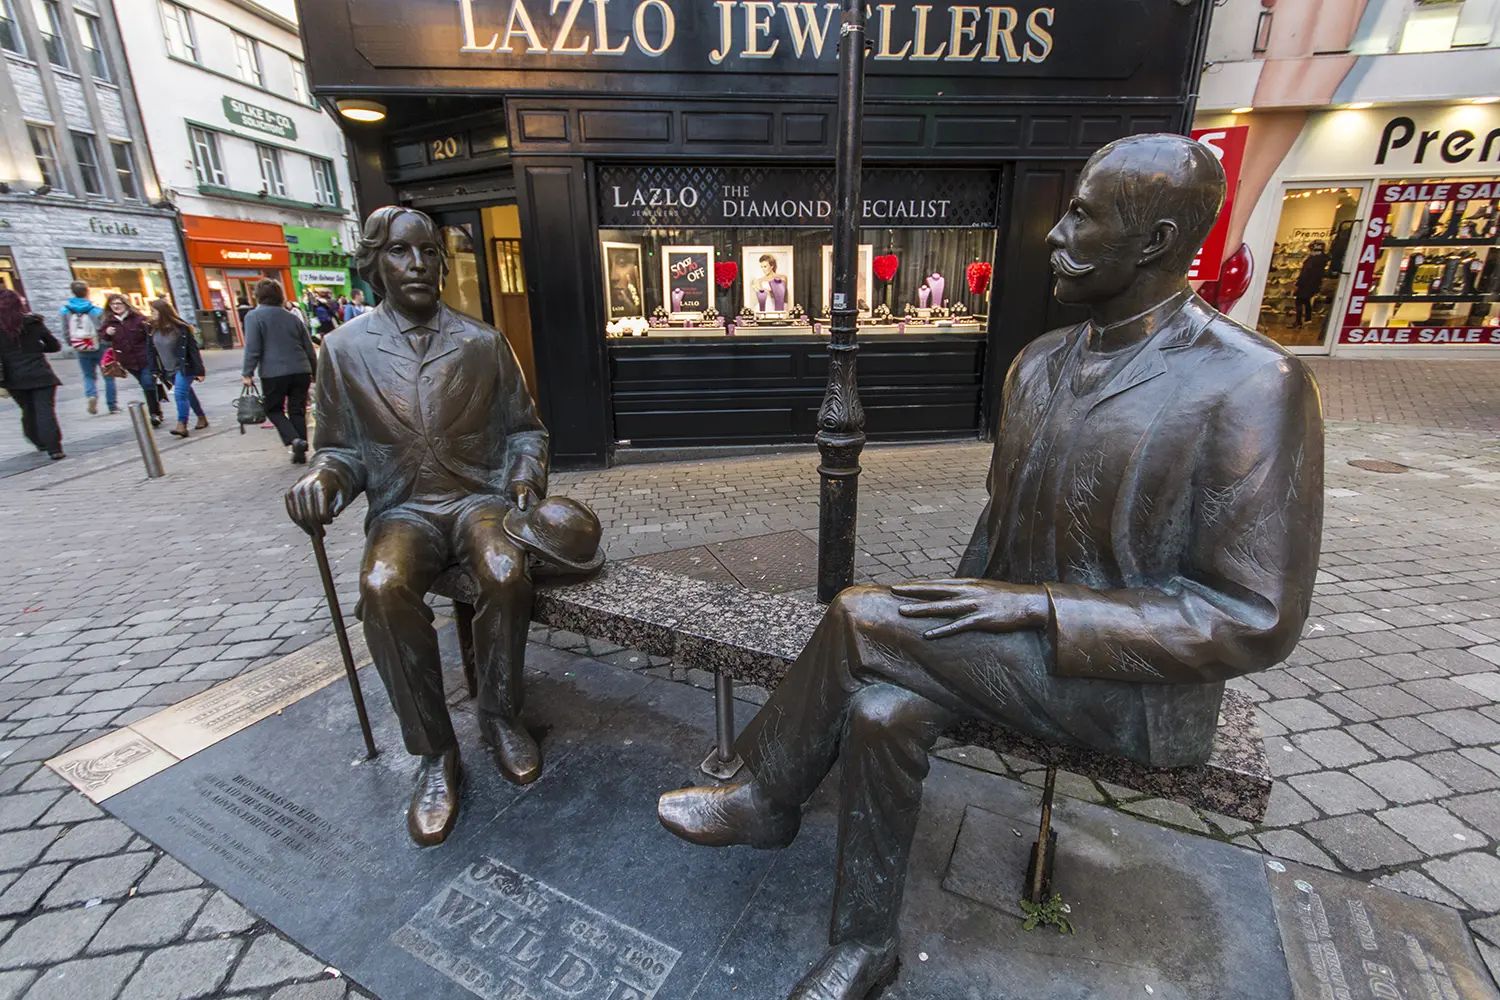 Statue of Oscar Wilde and Eduard Vilde in the city center of Galway - Ireland.